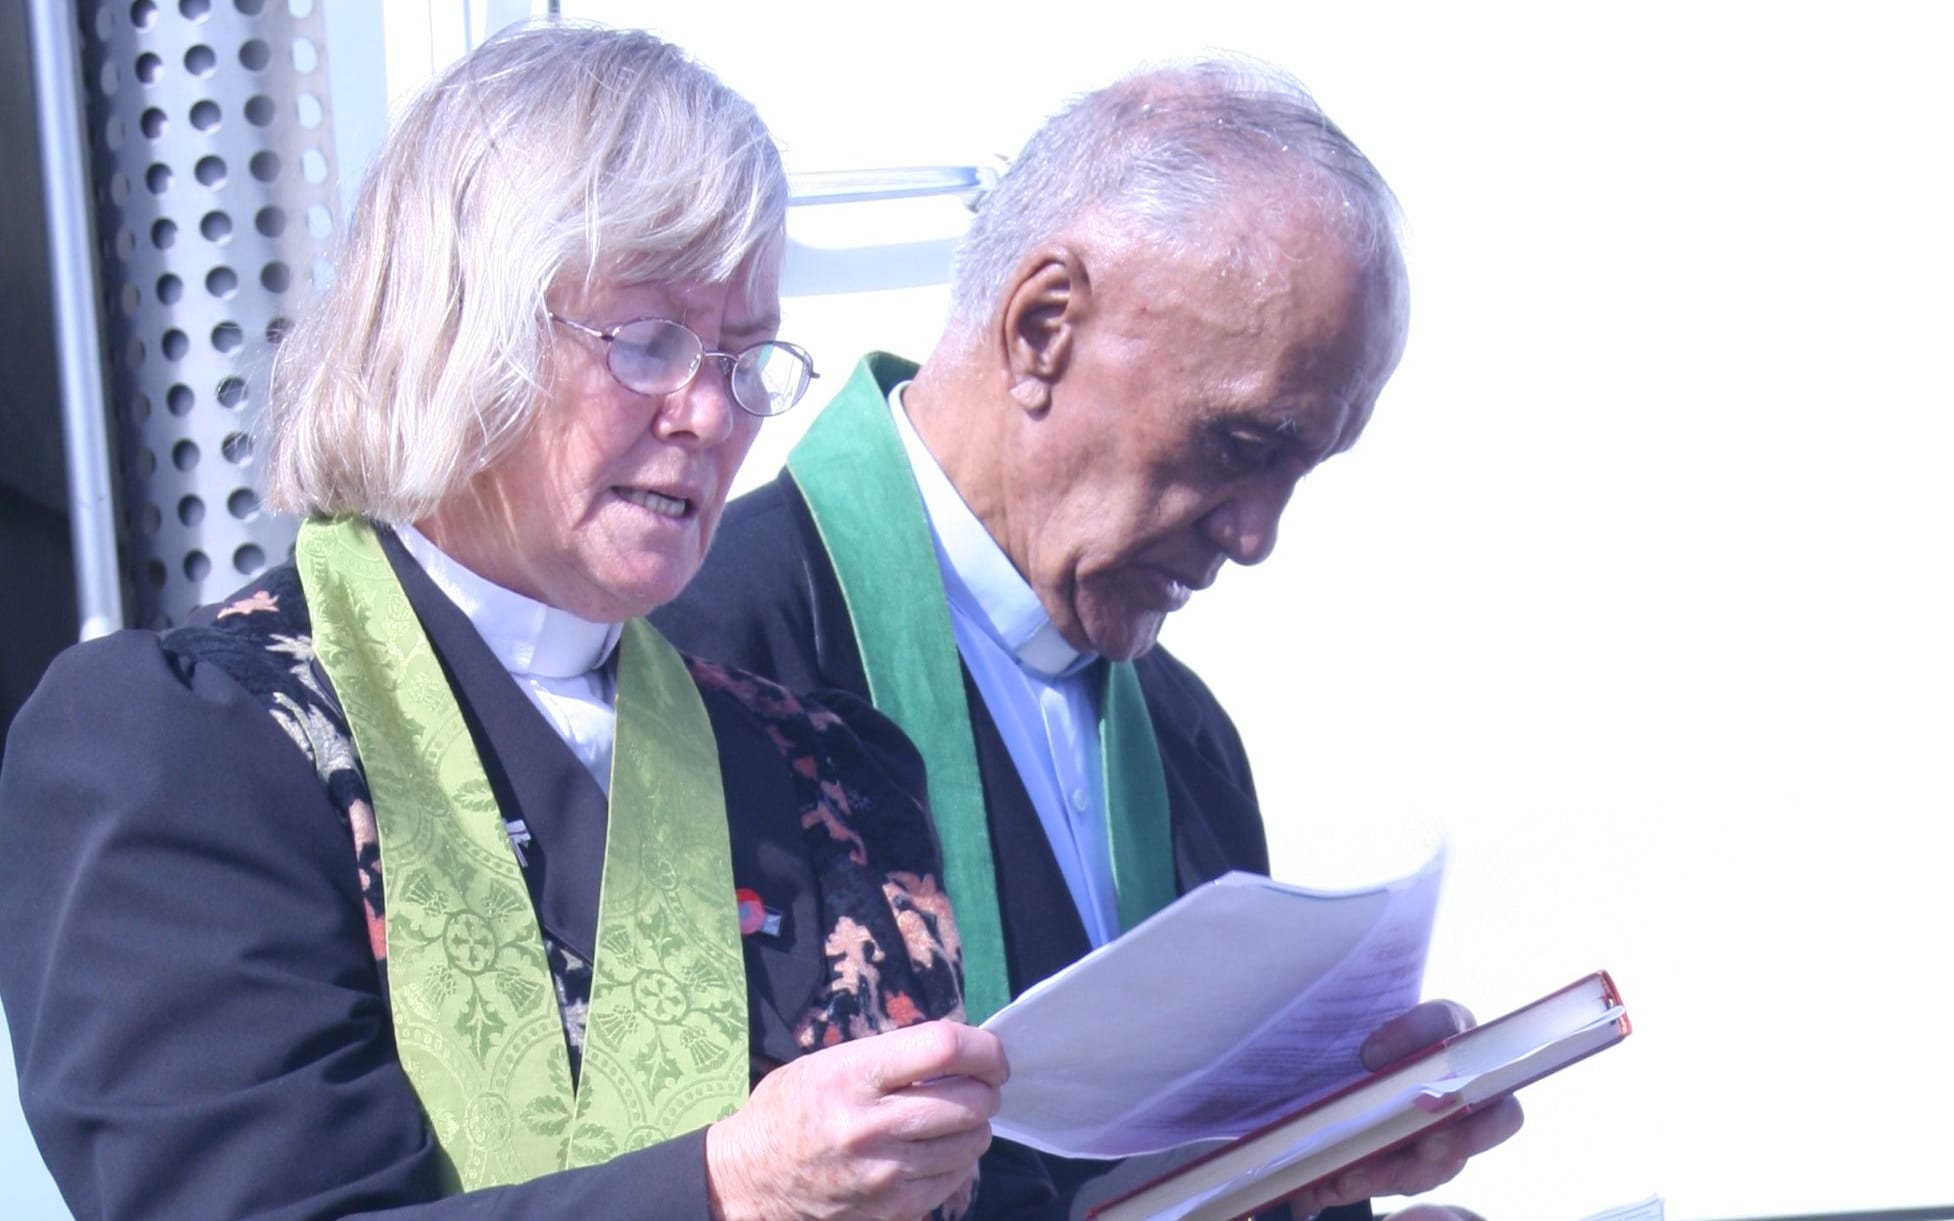 Reverend Hirini Parata, from Moerewa, and Glenys David, from Kawakawa, carried out the blessing at Opua on 5 October 2015.